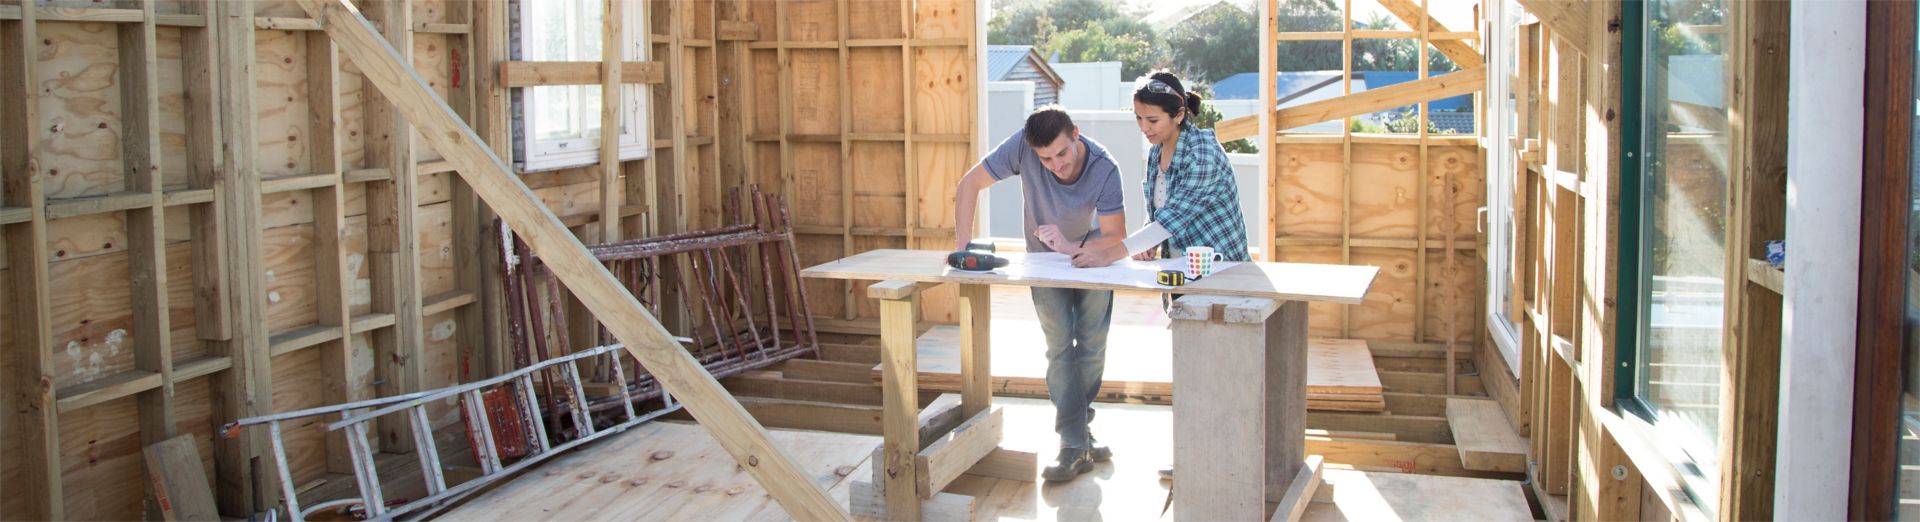 Man and a woman looking at some plans while building a wooden house